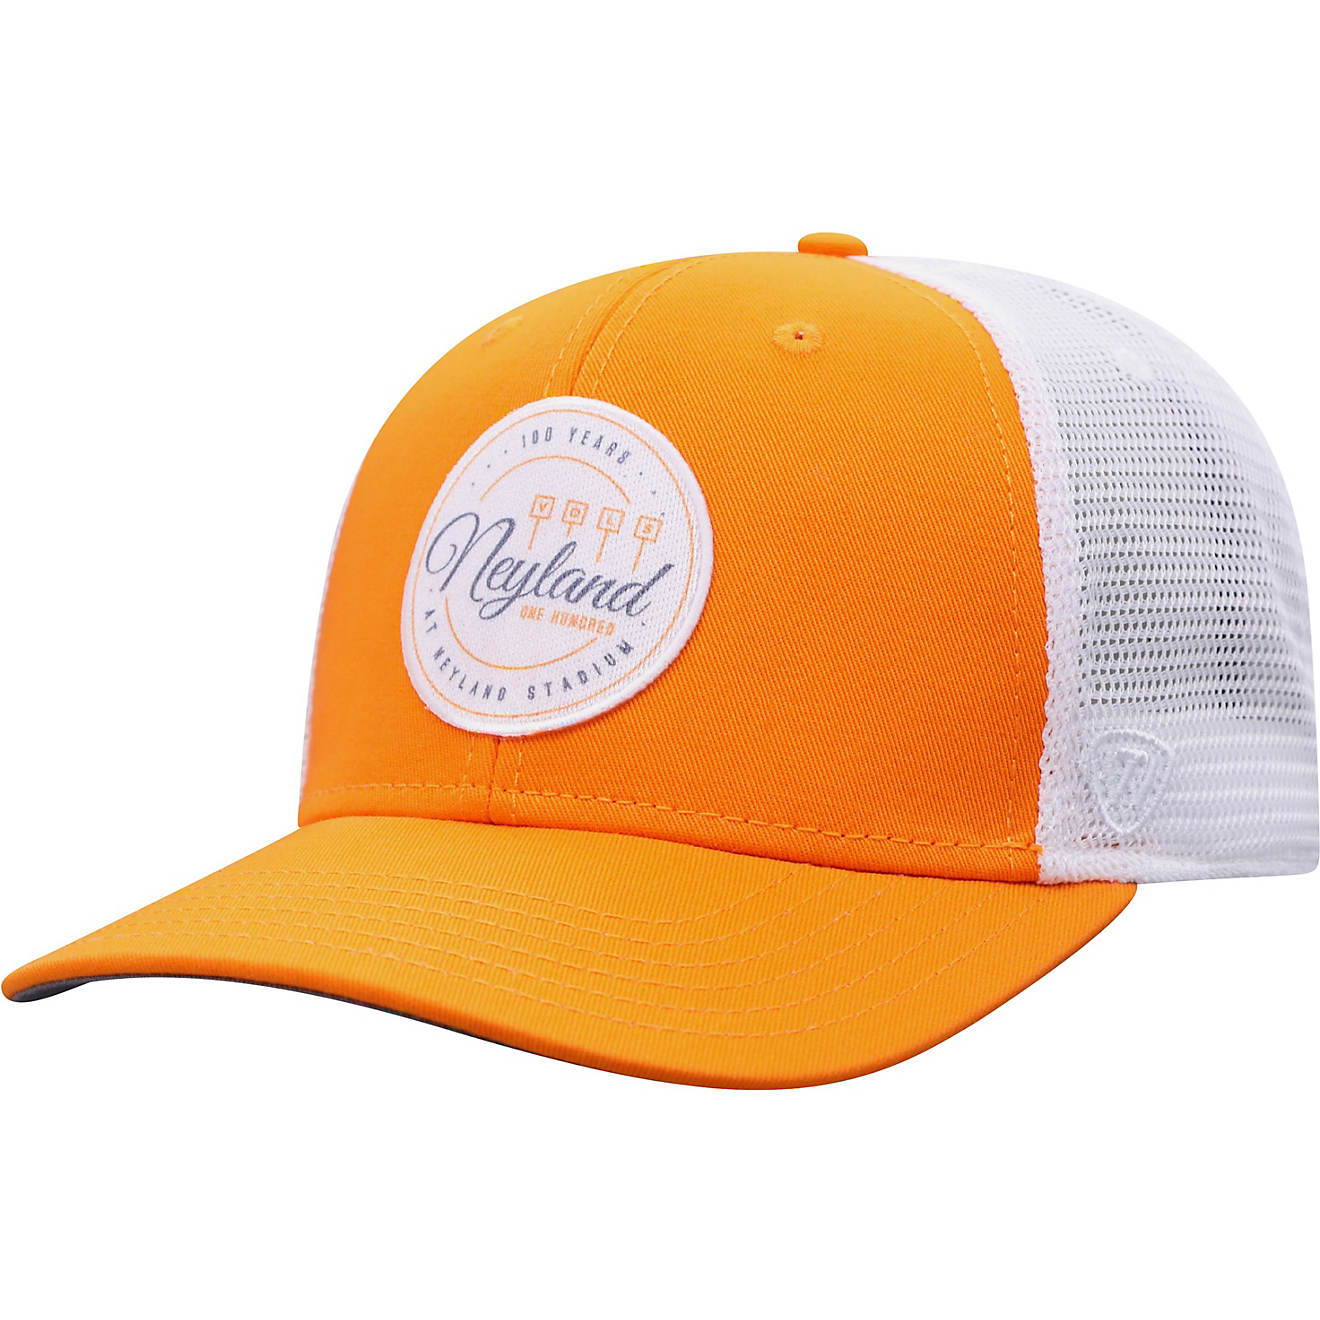 Top of the World Men's University of Tennessee Neyland 100 Circle Stadium Cap                                                    - view number 1